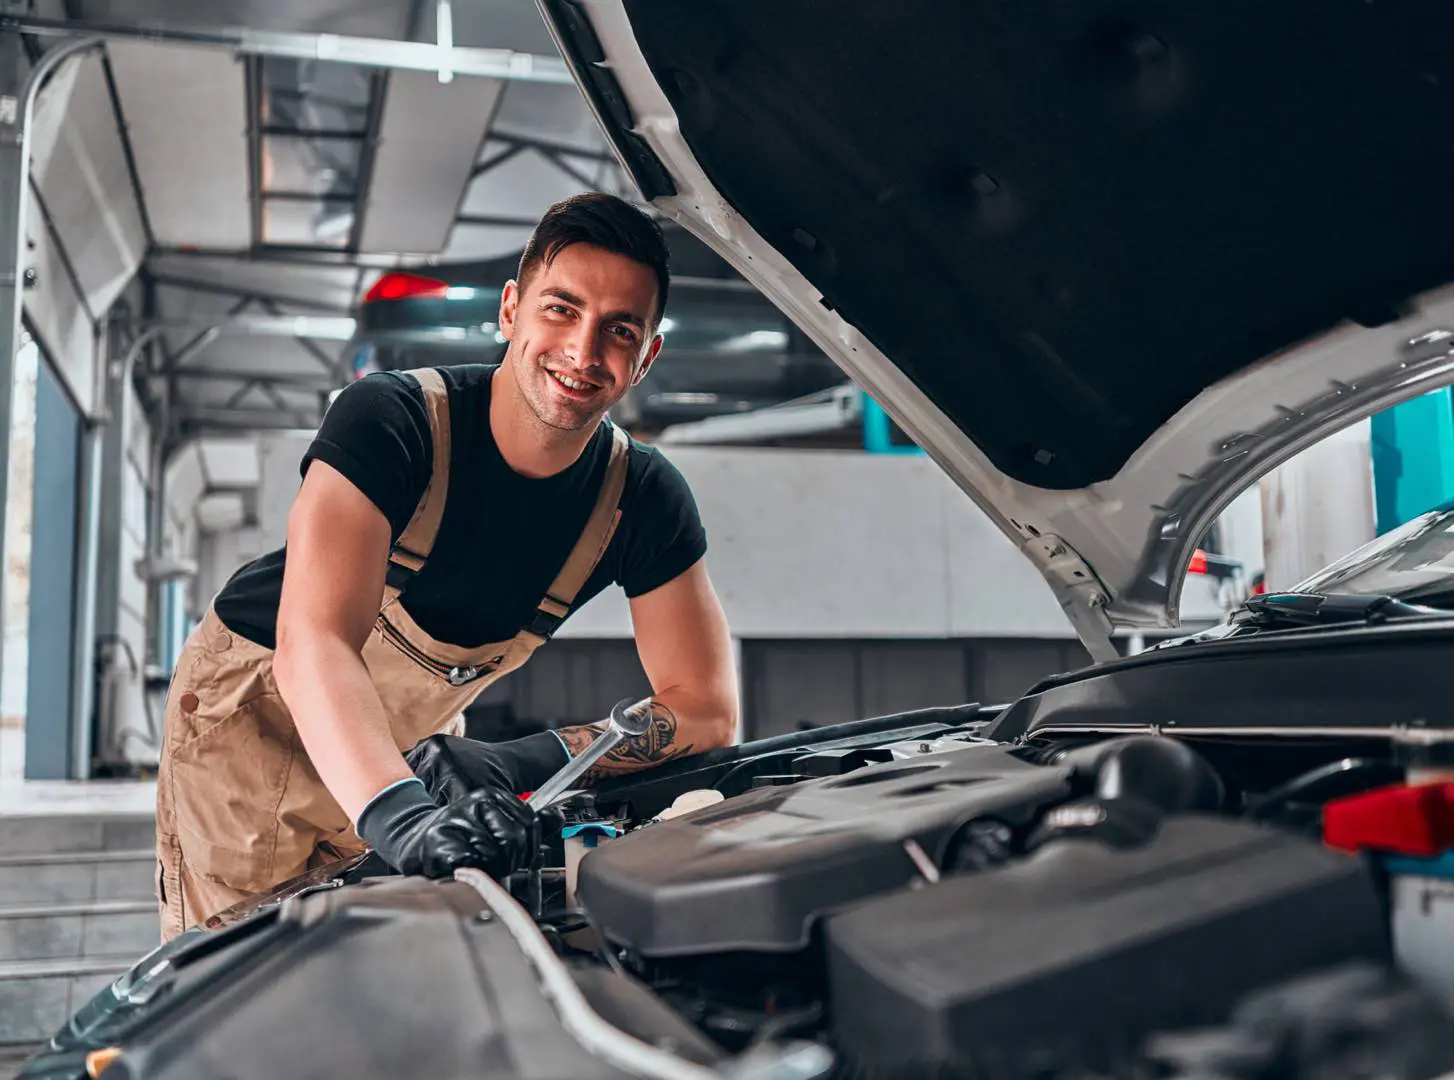 Masters Auto Repair Online Discounted, Save 45% | jlcatj.gob.mx